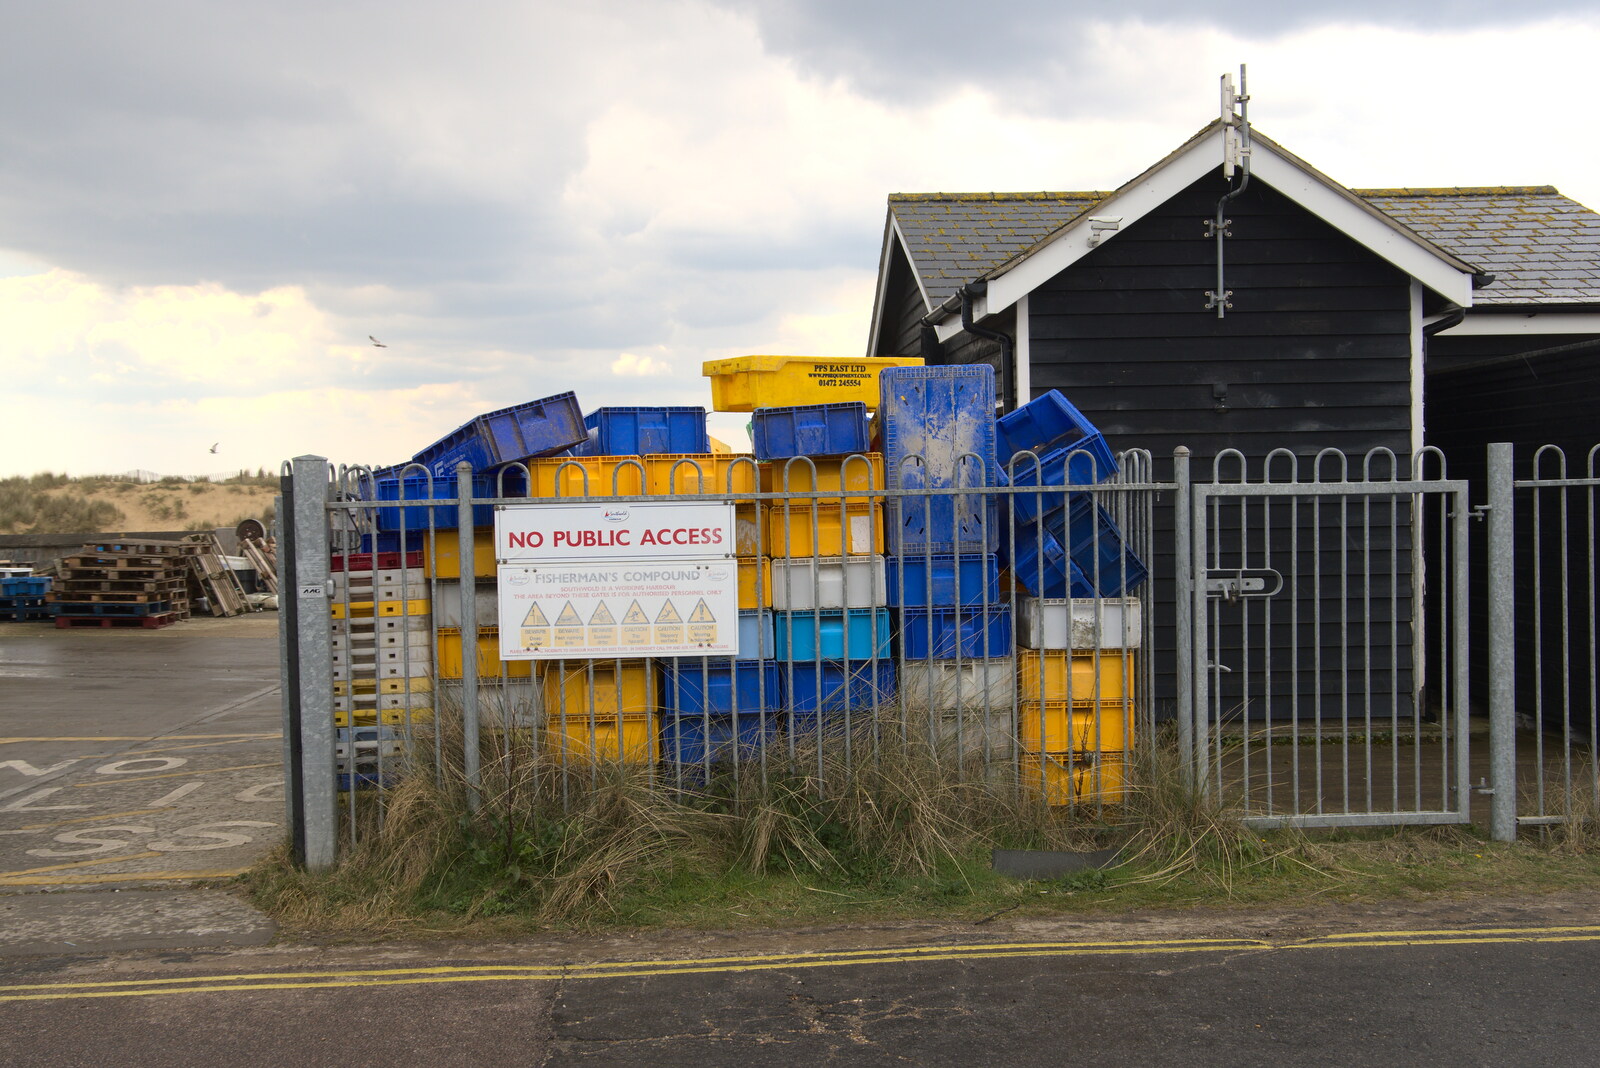 A pile of crates in the Fisherman's compound from A Chilly Trip to the Beach, Southwold Harbour, Suffolk - 2nd May 2021